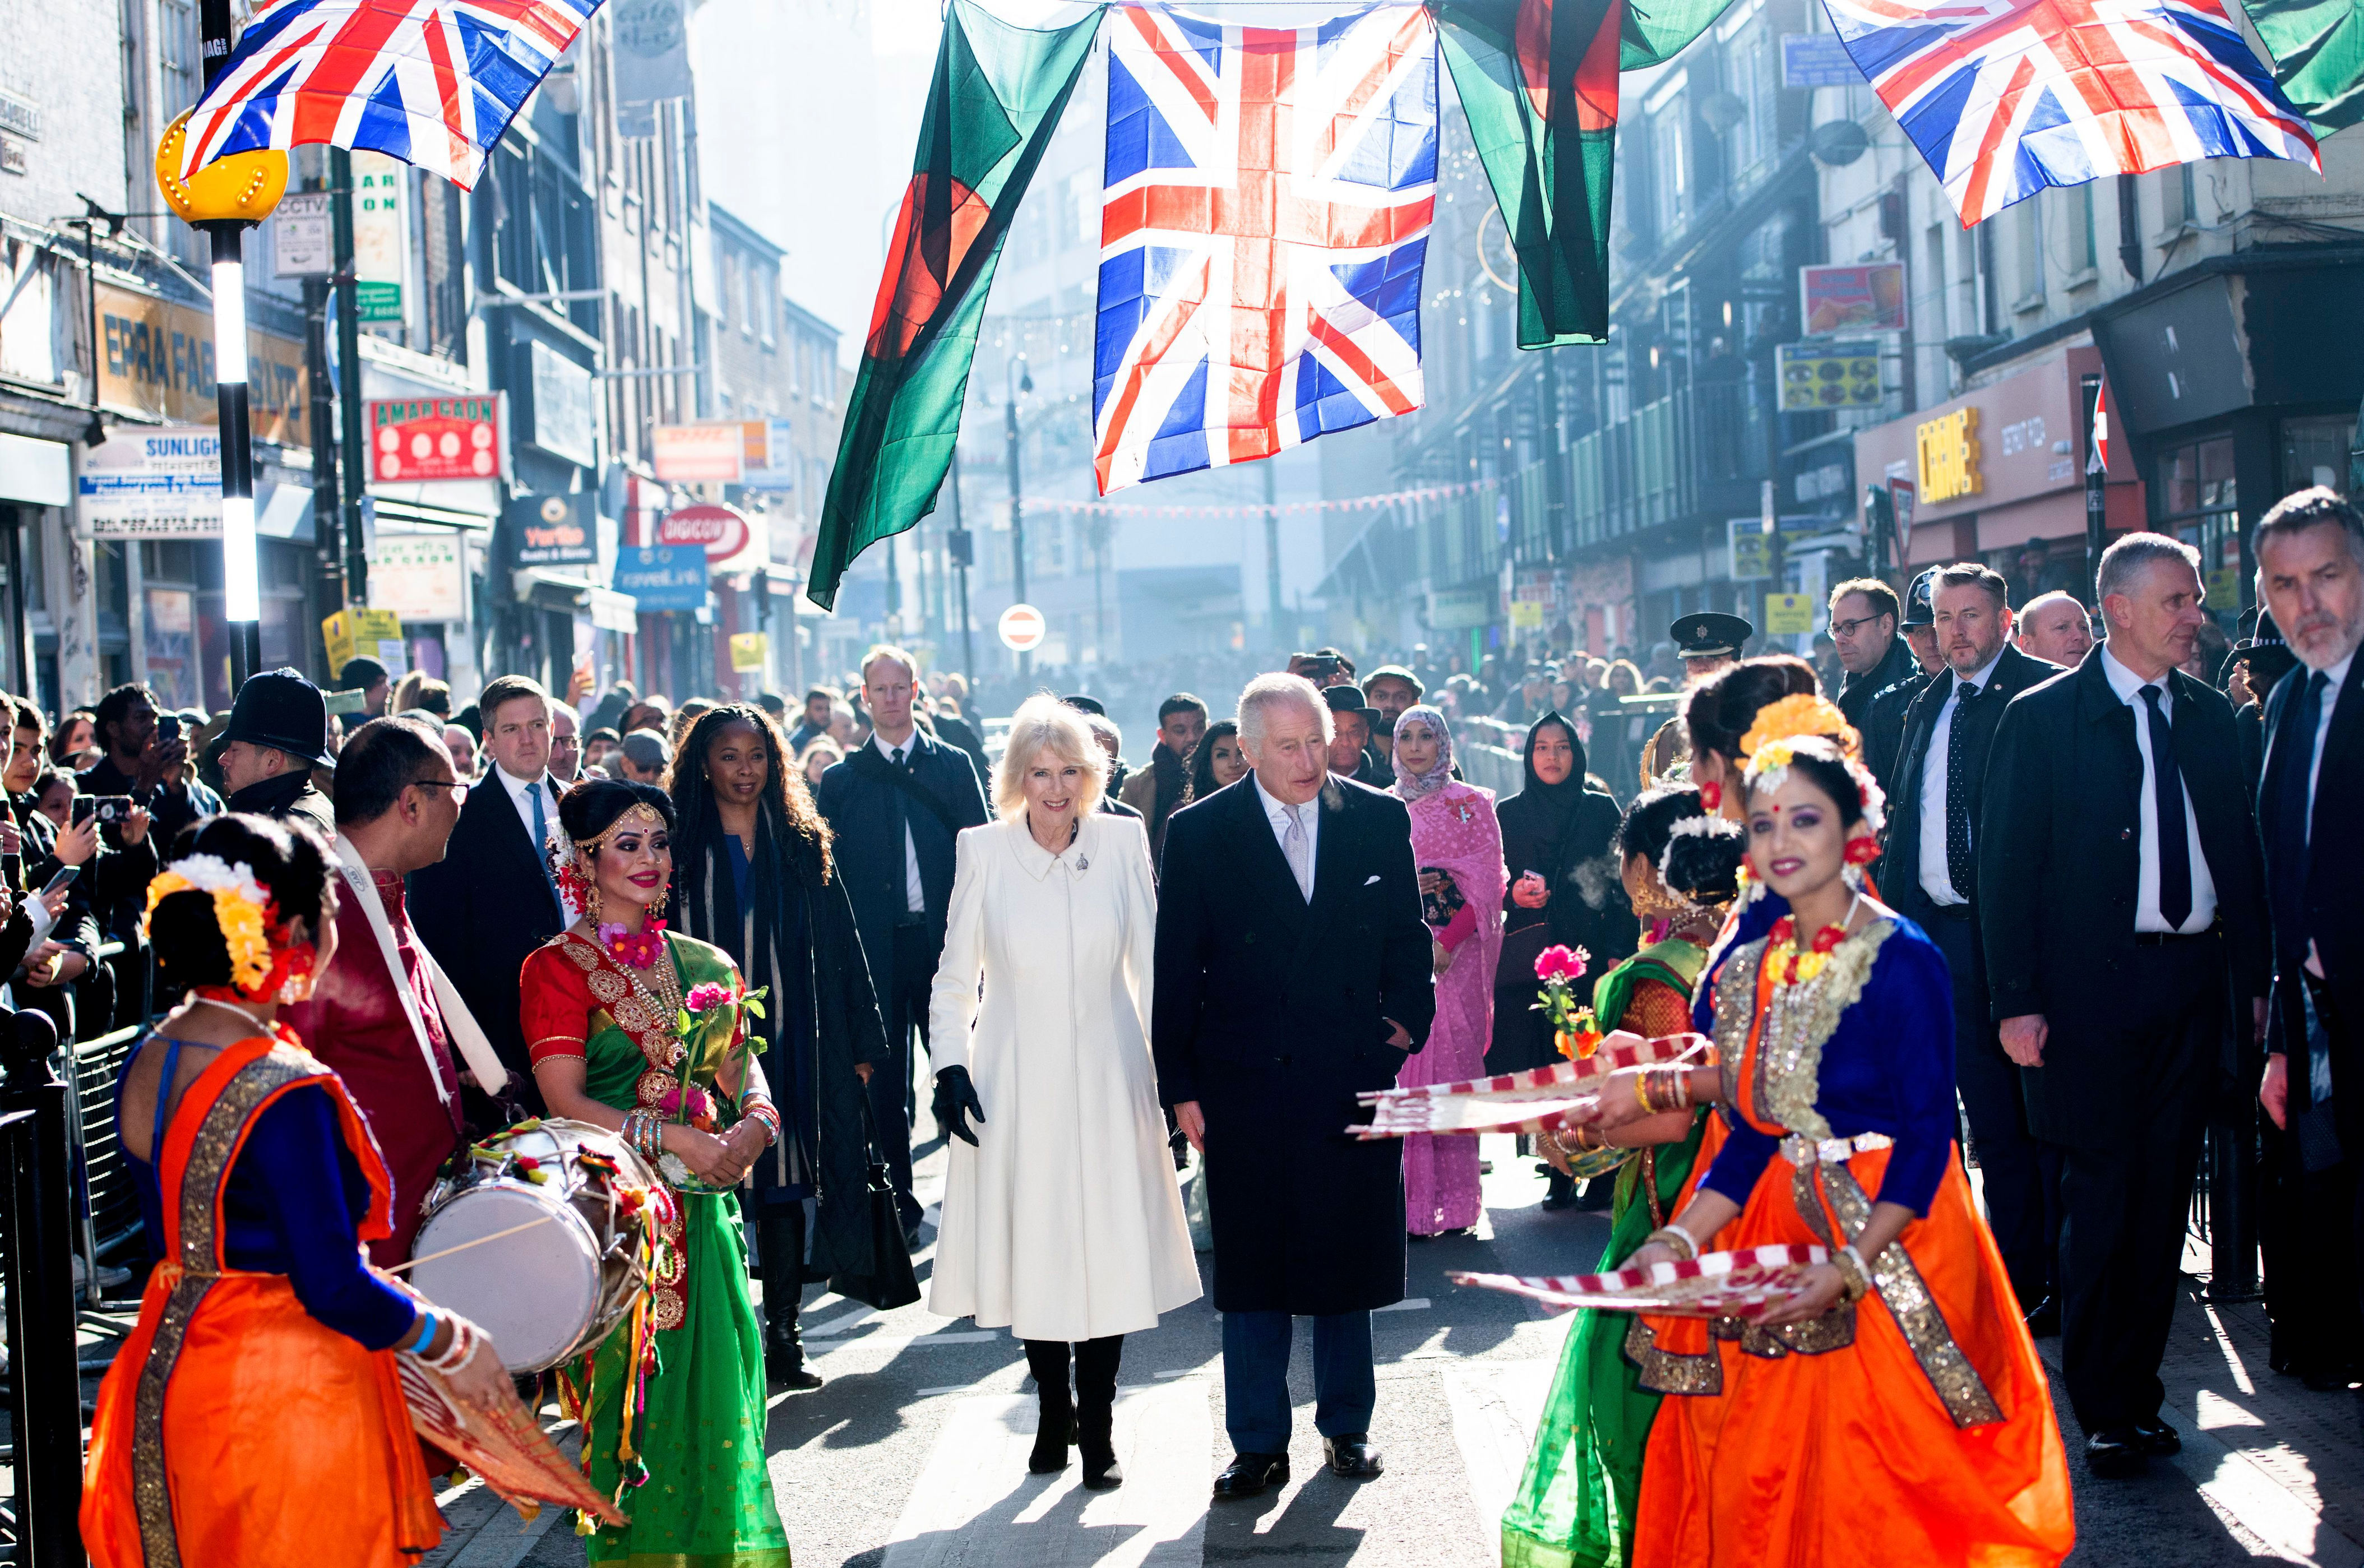 <p>King Charles III and Queen Consort Camilla visited Brick Lane in London on Feb. 8, 2023, where they chatted with members of the city's Bangladeshi community, planted a tree and received a takeout meal from a South Asian restaurant.</p>